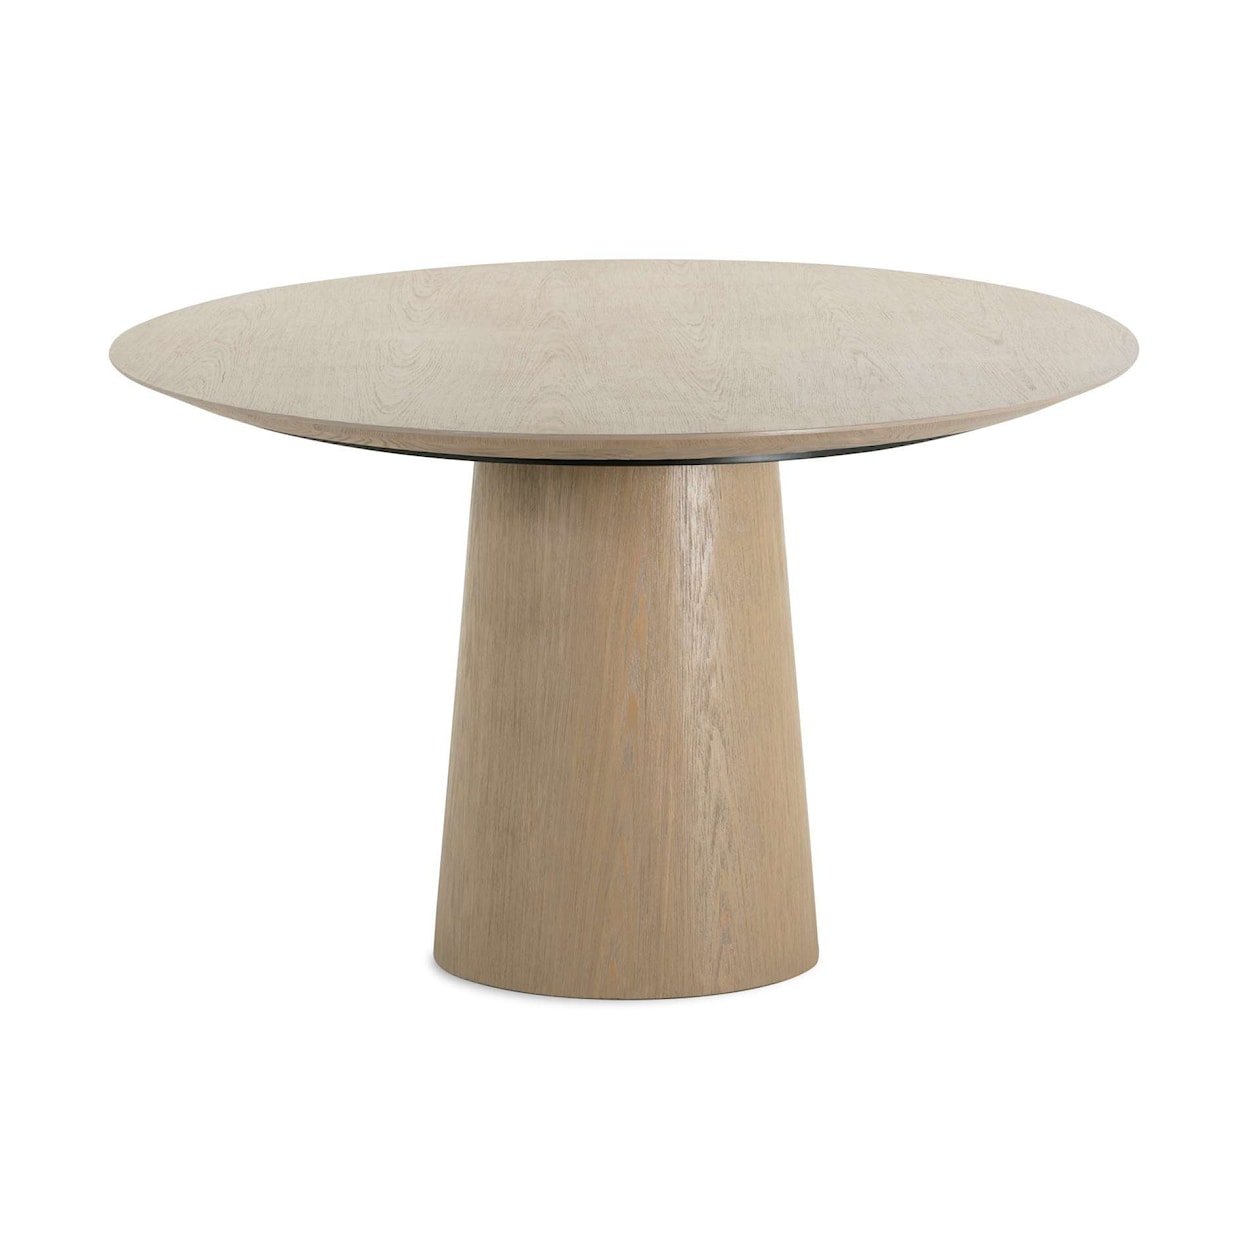 Rowe Costa Costa Round Dining Table(Wood)